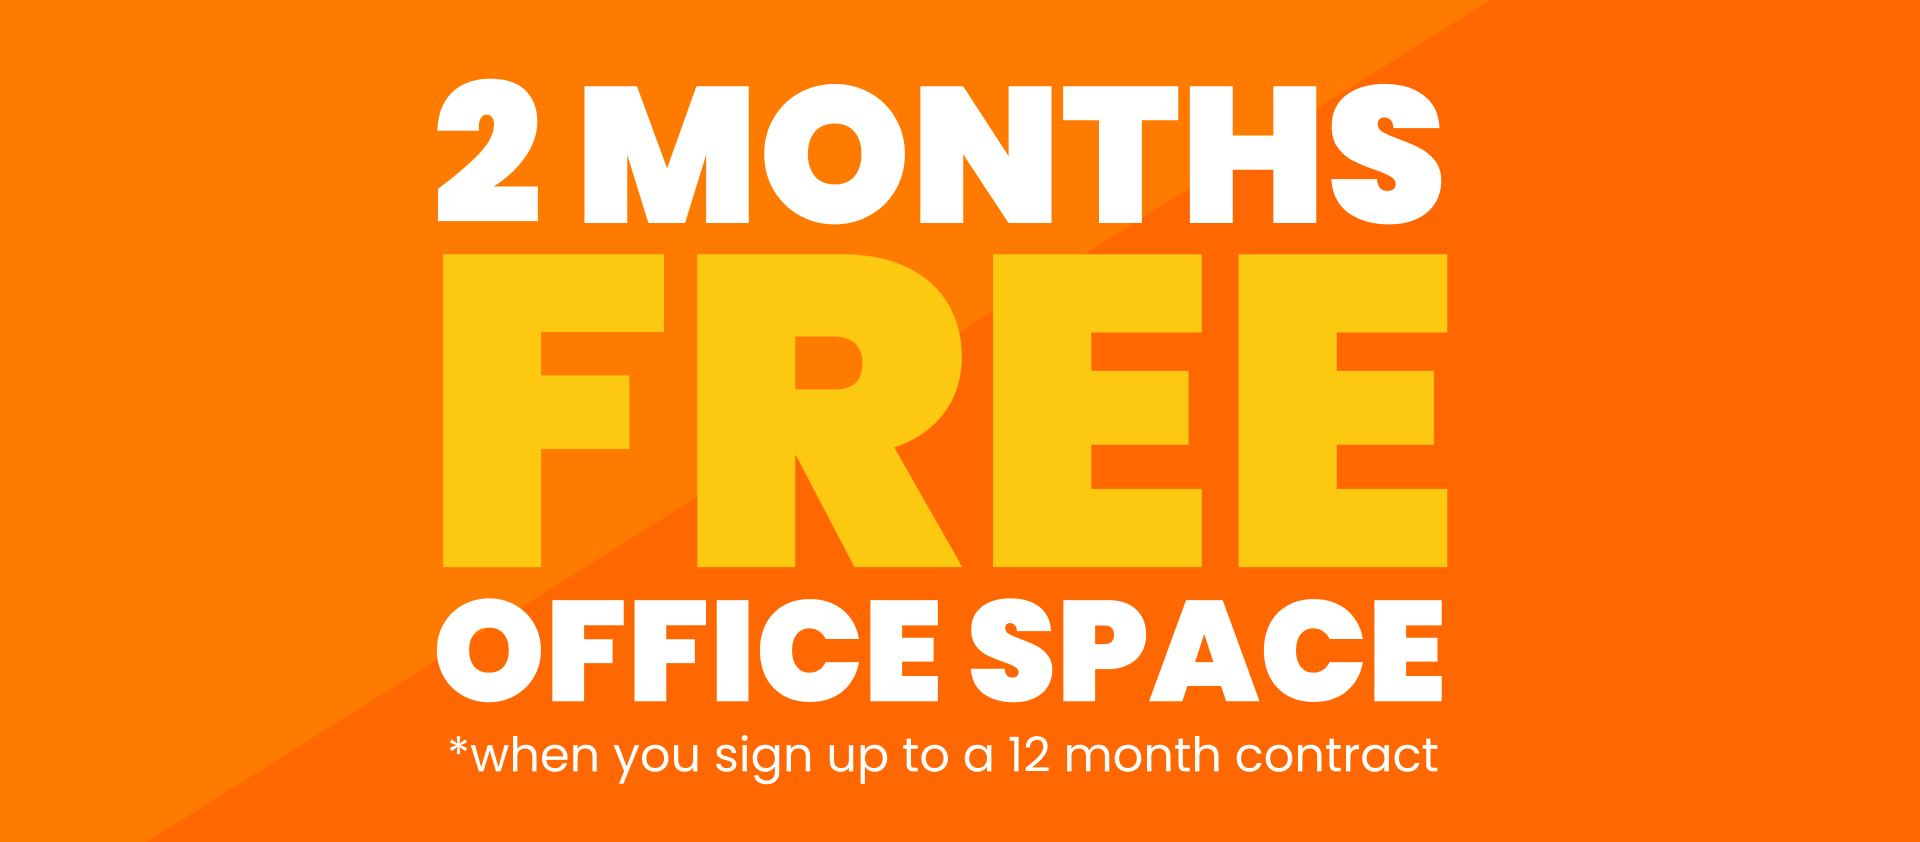 2 Months Free Office Space